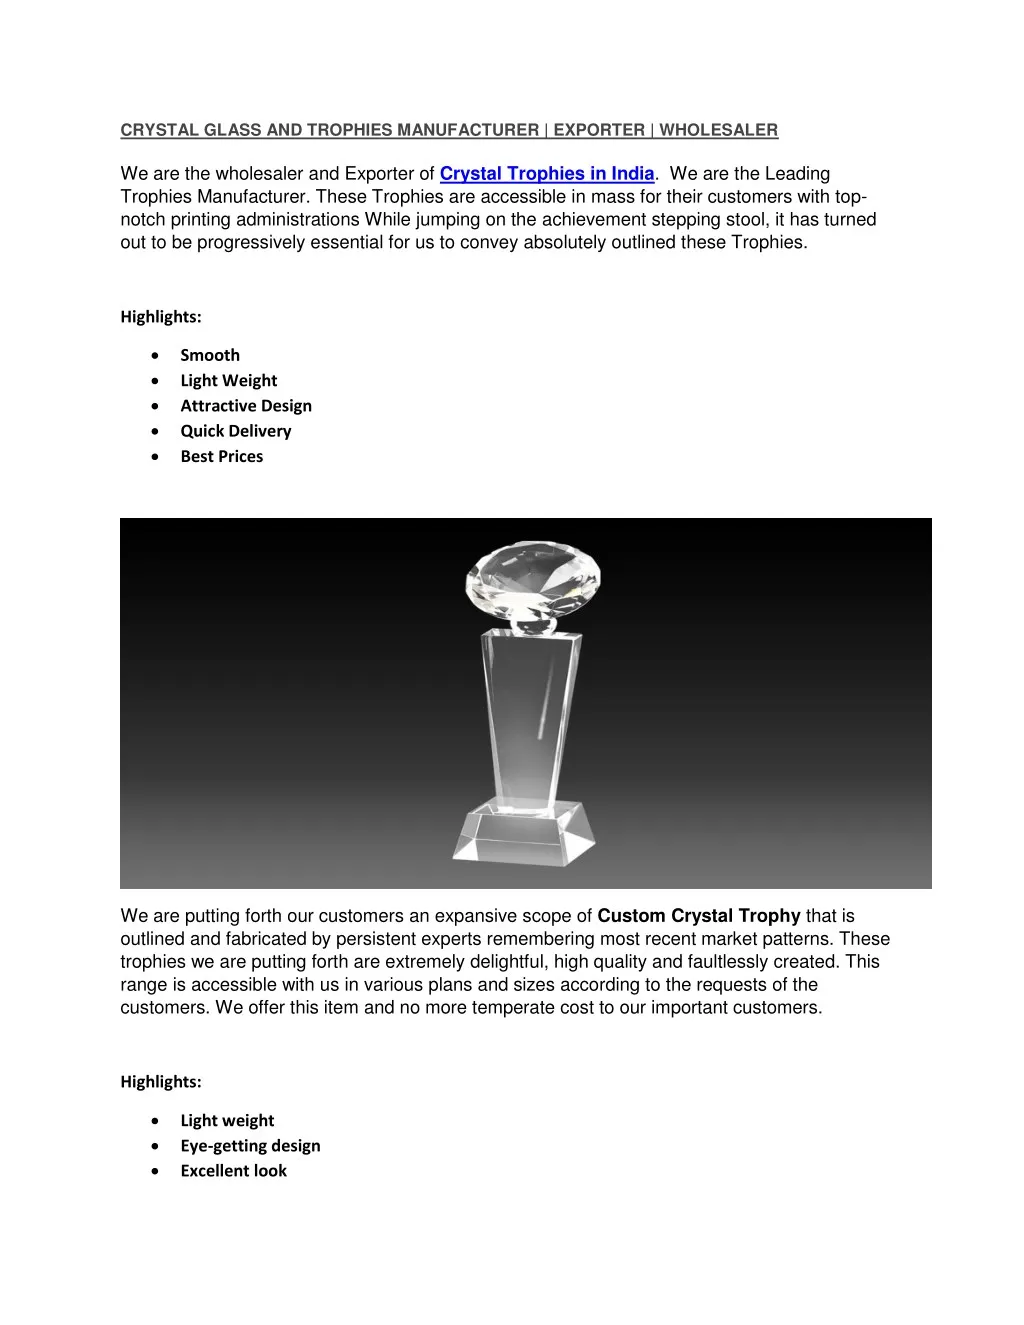 crystal glass and trophies manufacturer exporter